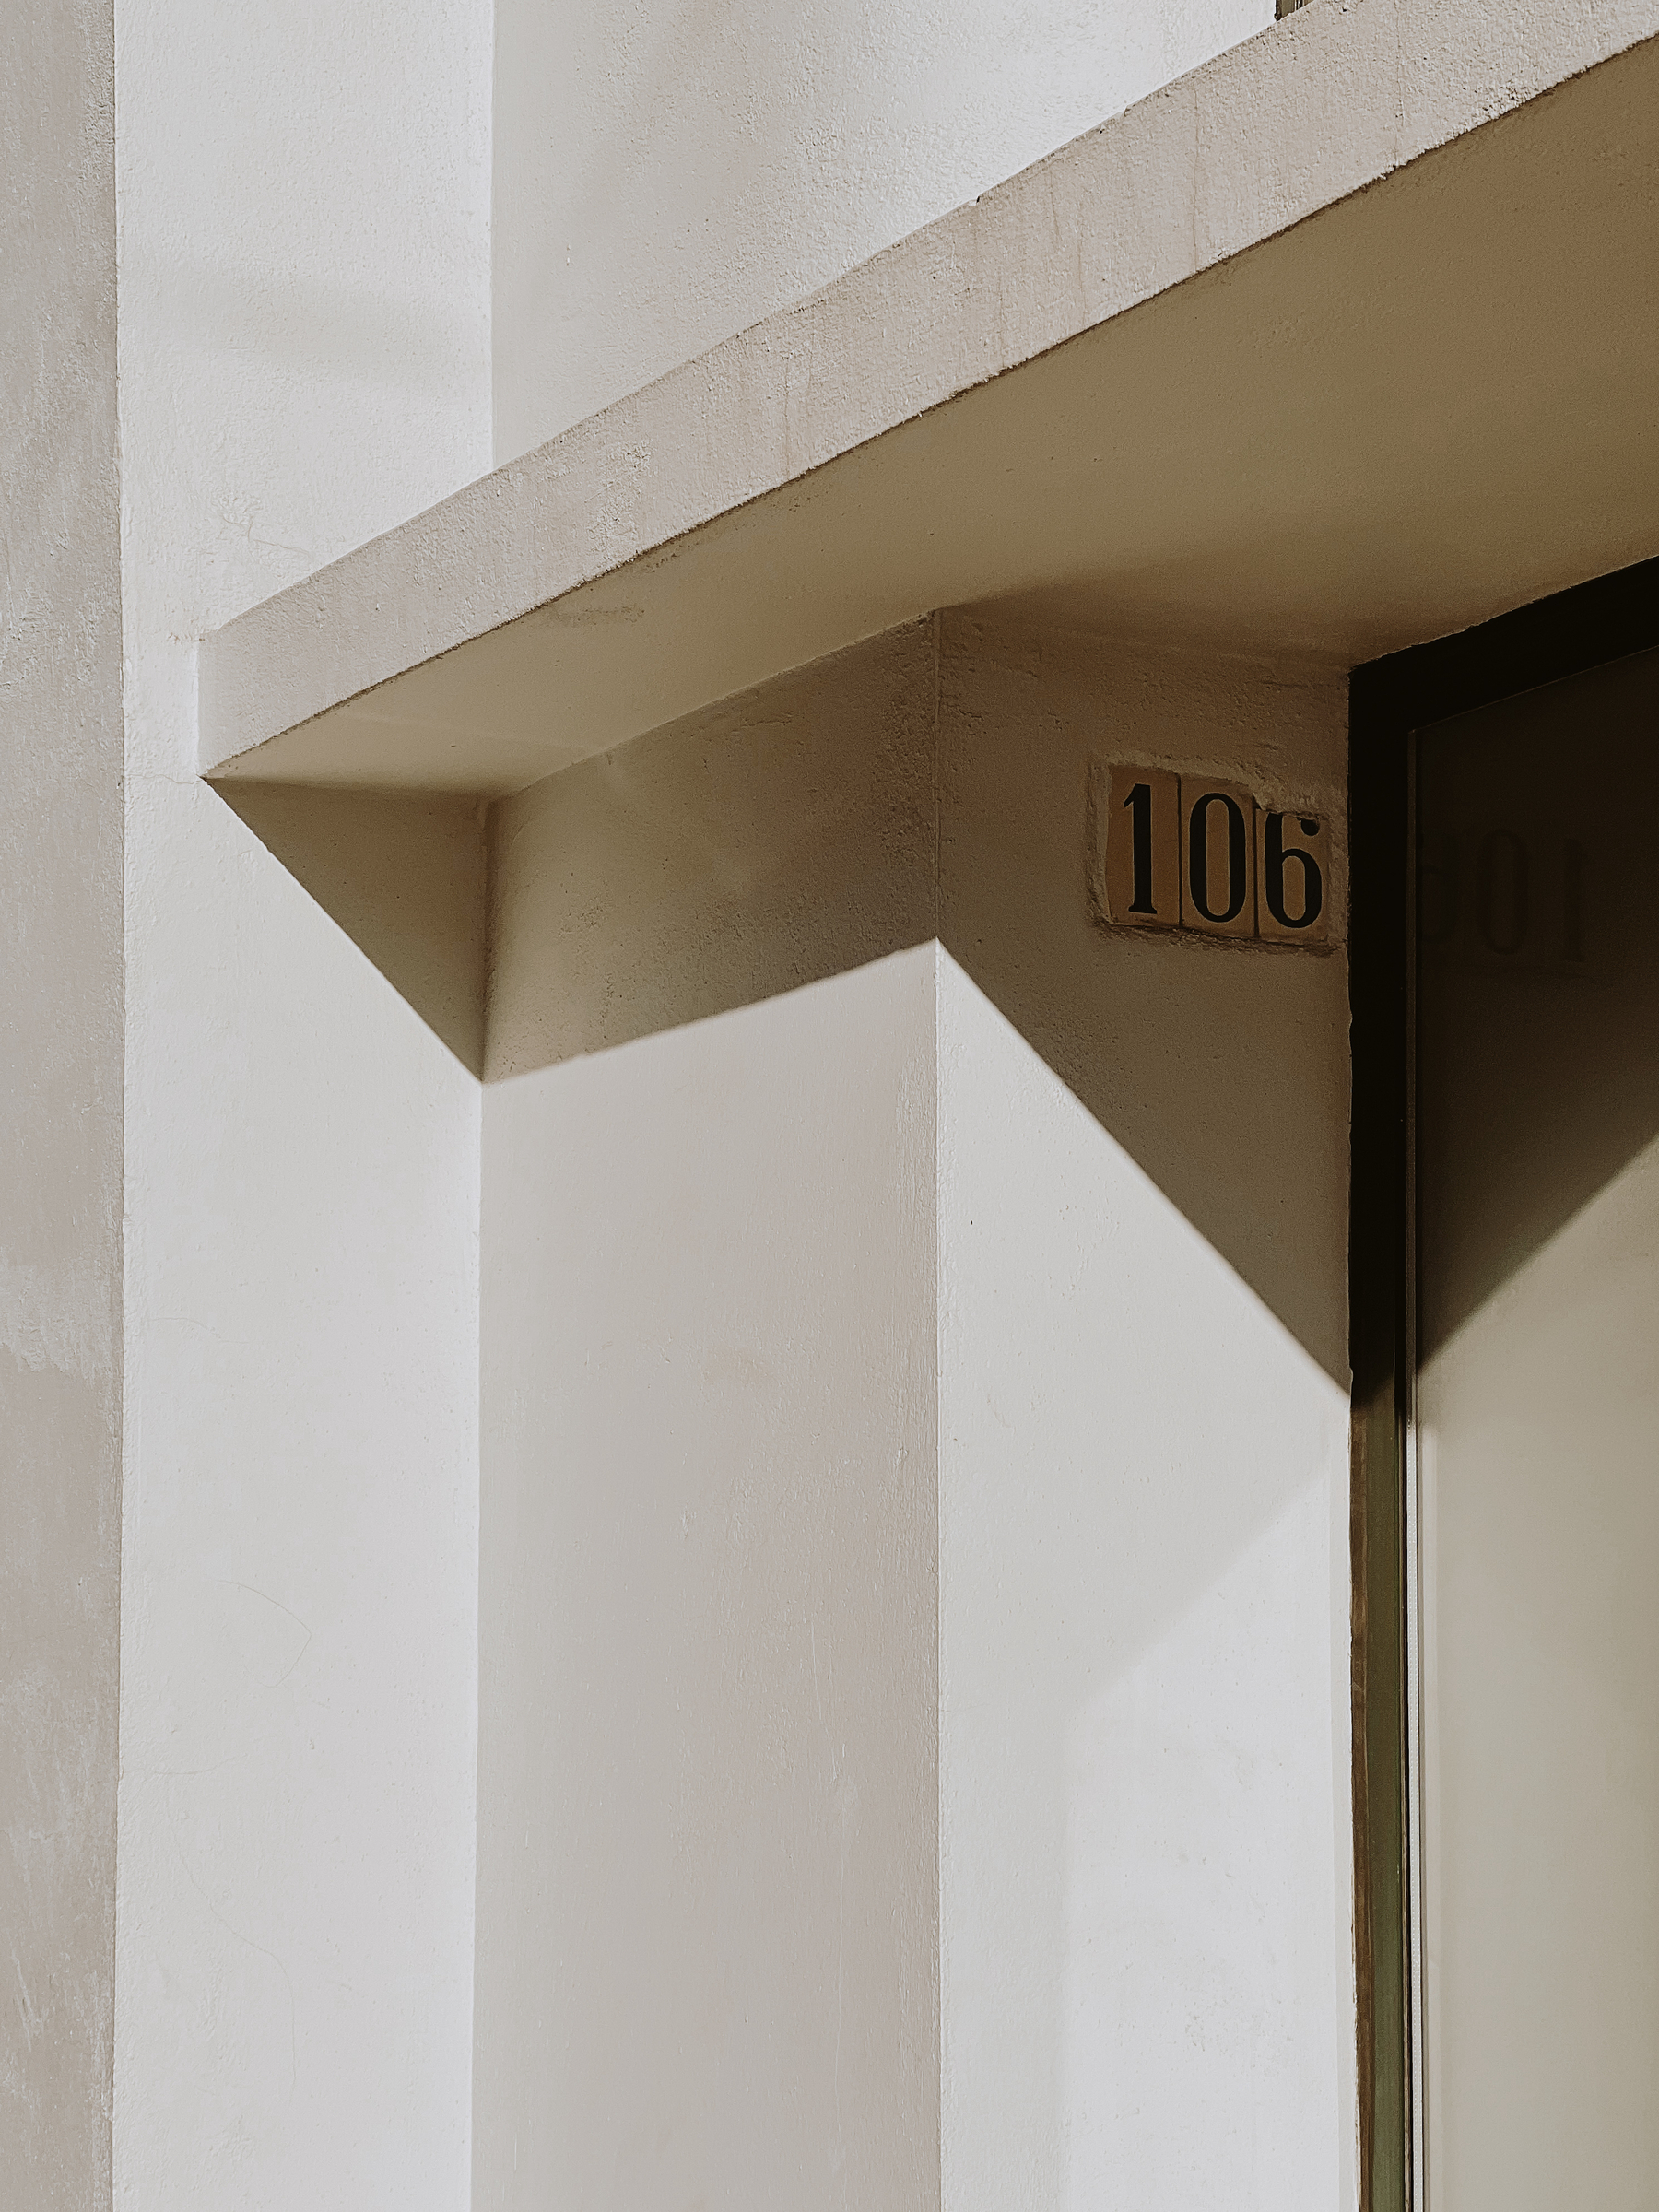 A close-up view of a building entrance with the number 106, featuring strong geometric lines and shadows.